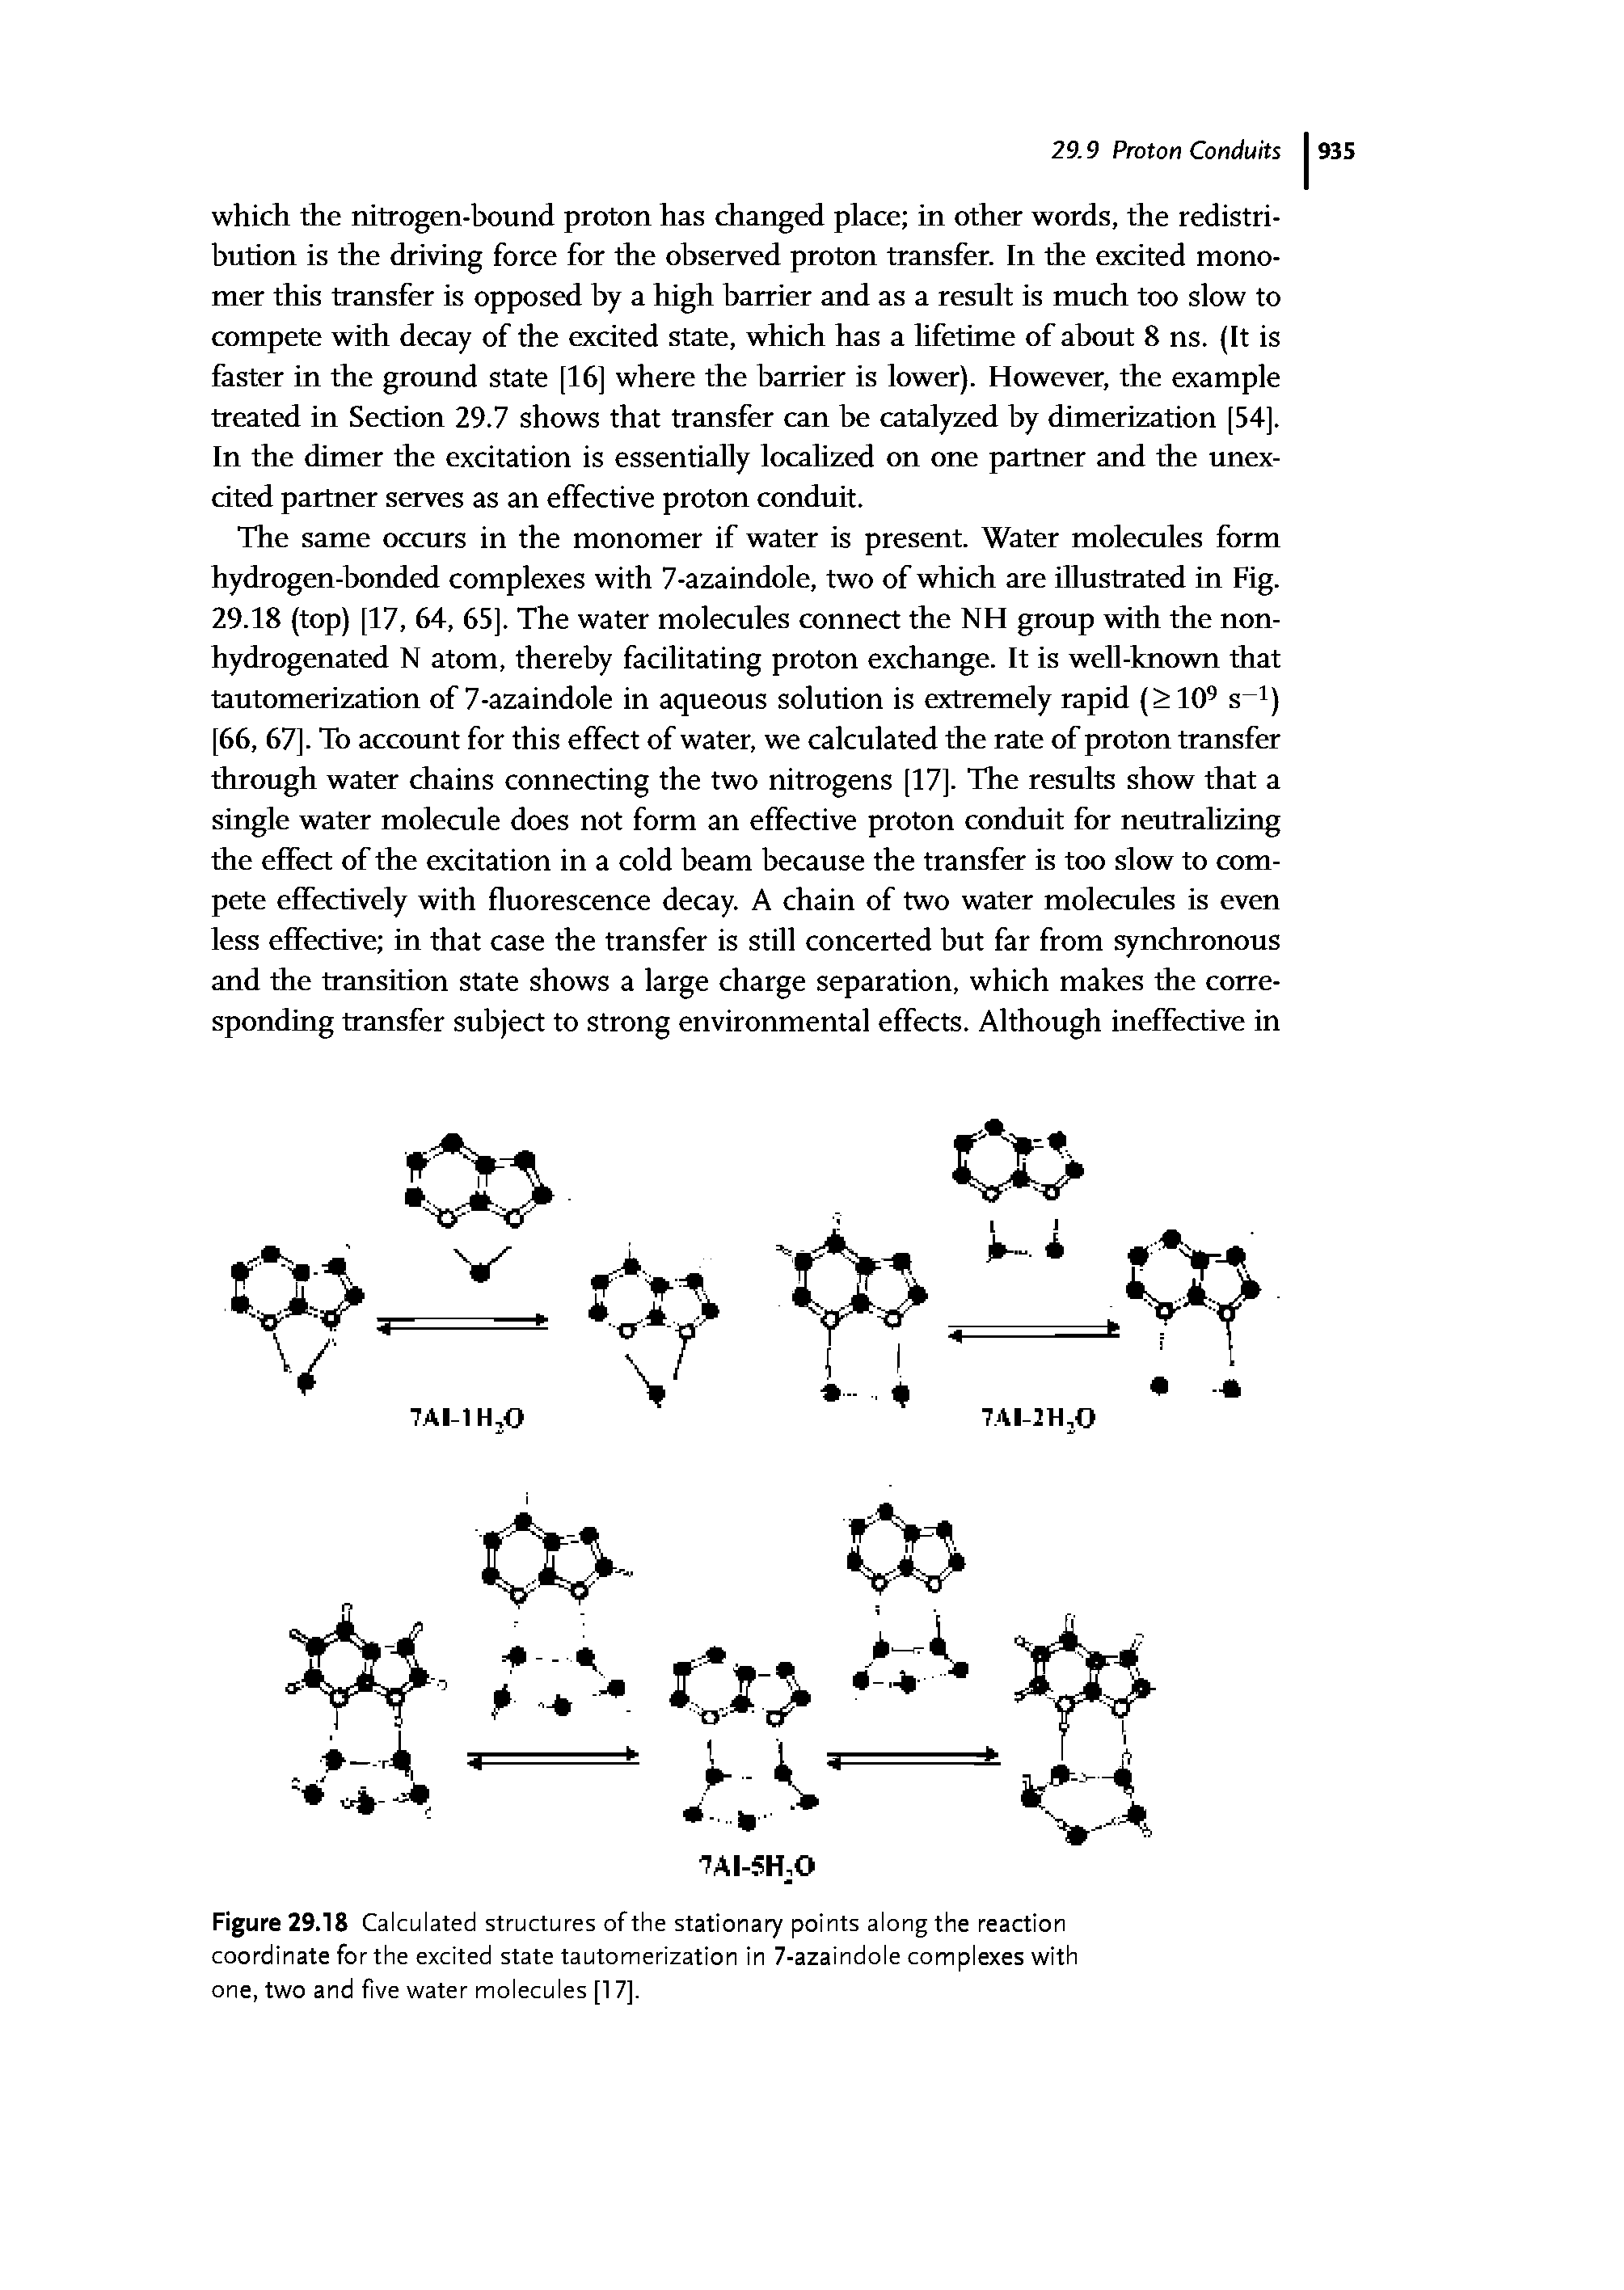 Figure 29.18 Calculated structures of the stationary points along the reaction coordinate for the excited state tautomerization in 7-azaindole complexes with one, two and five water molecules [17].